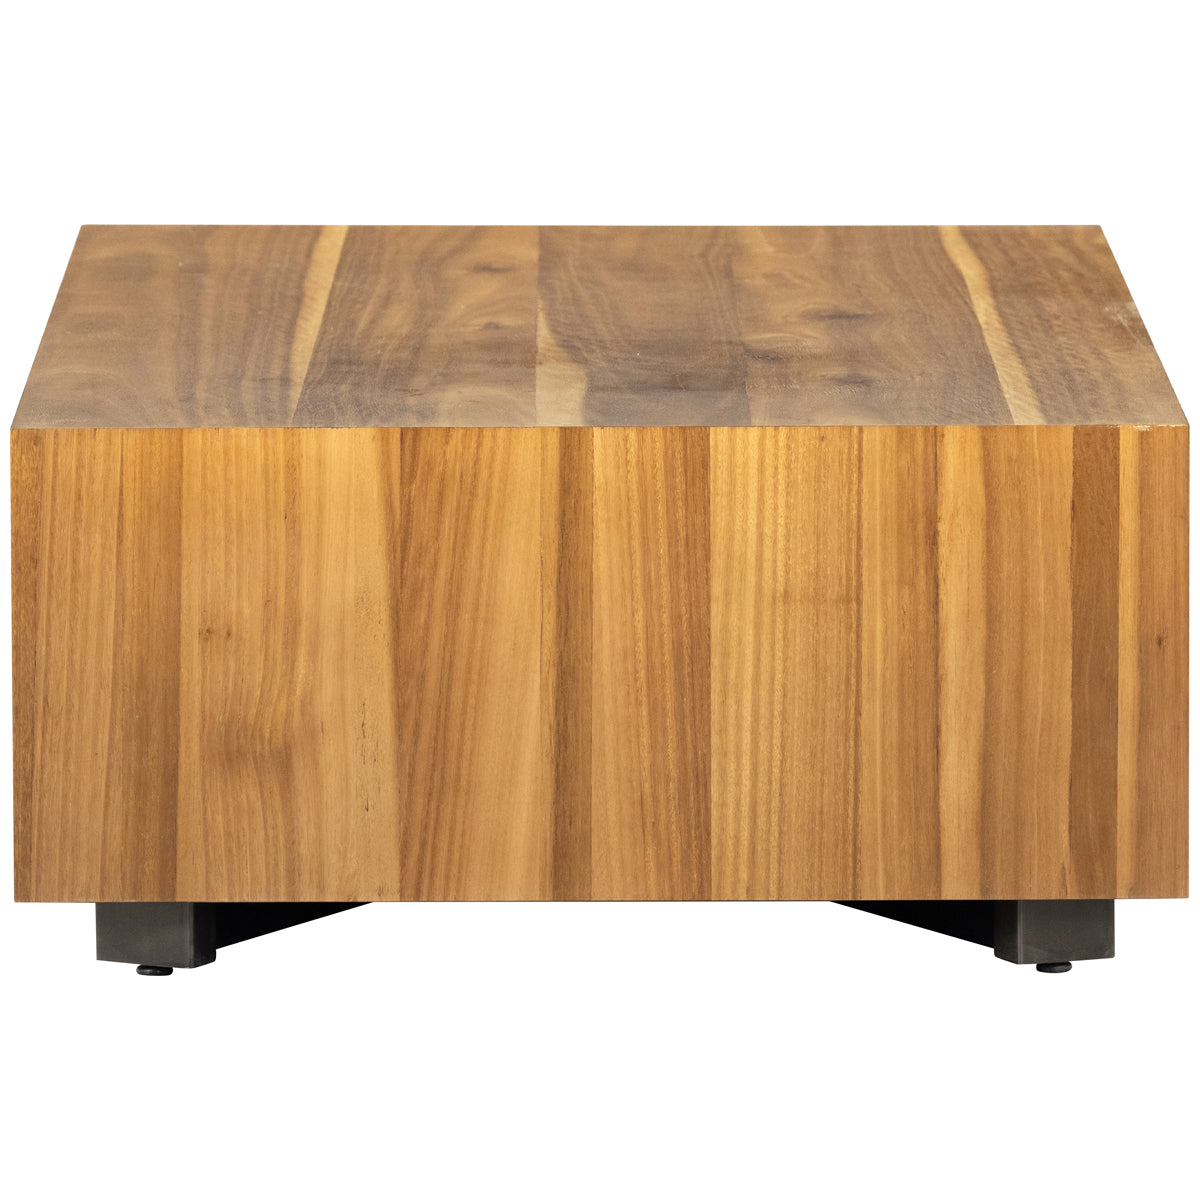 Four Hands Wesson Hudson Rectangle Coffee Table - Natural Yukas